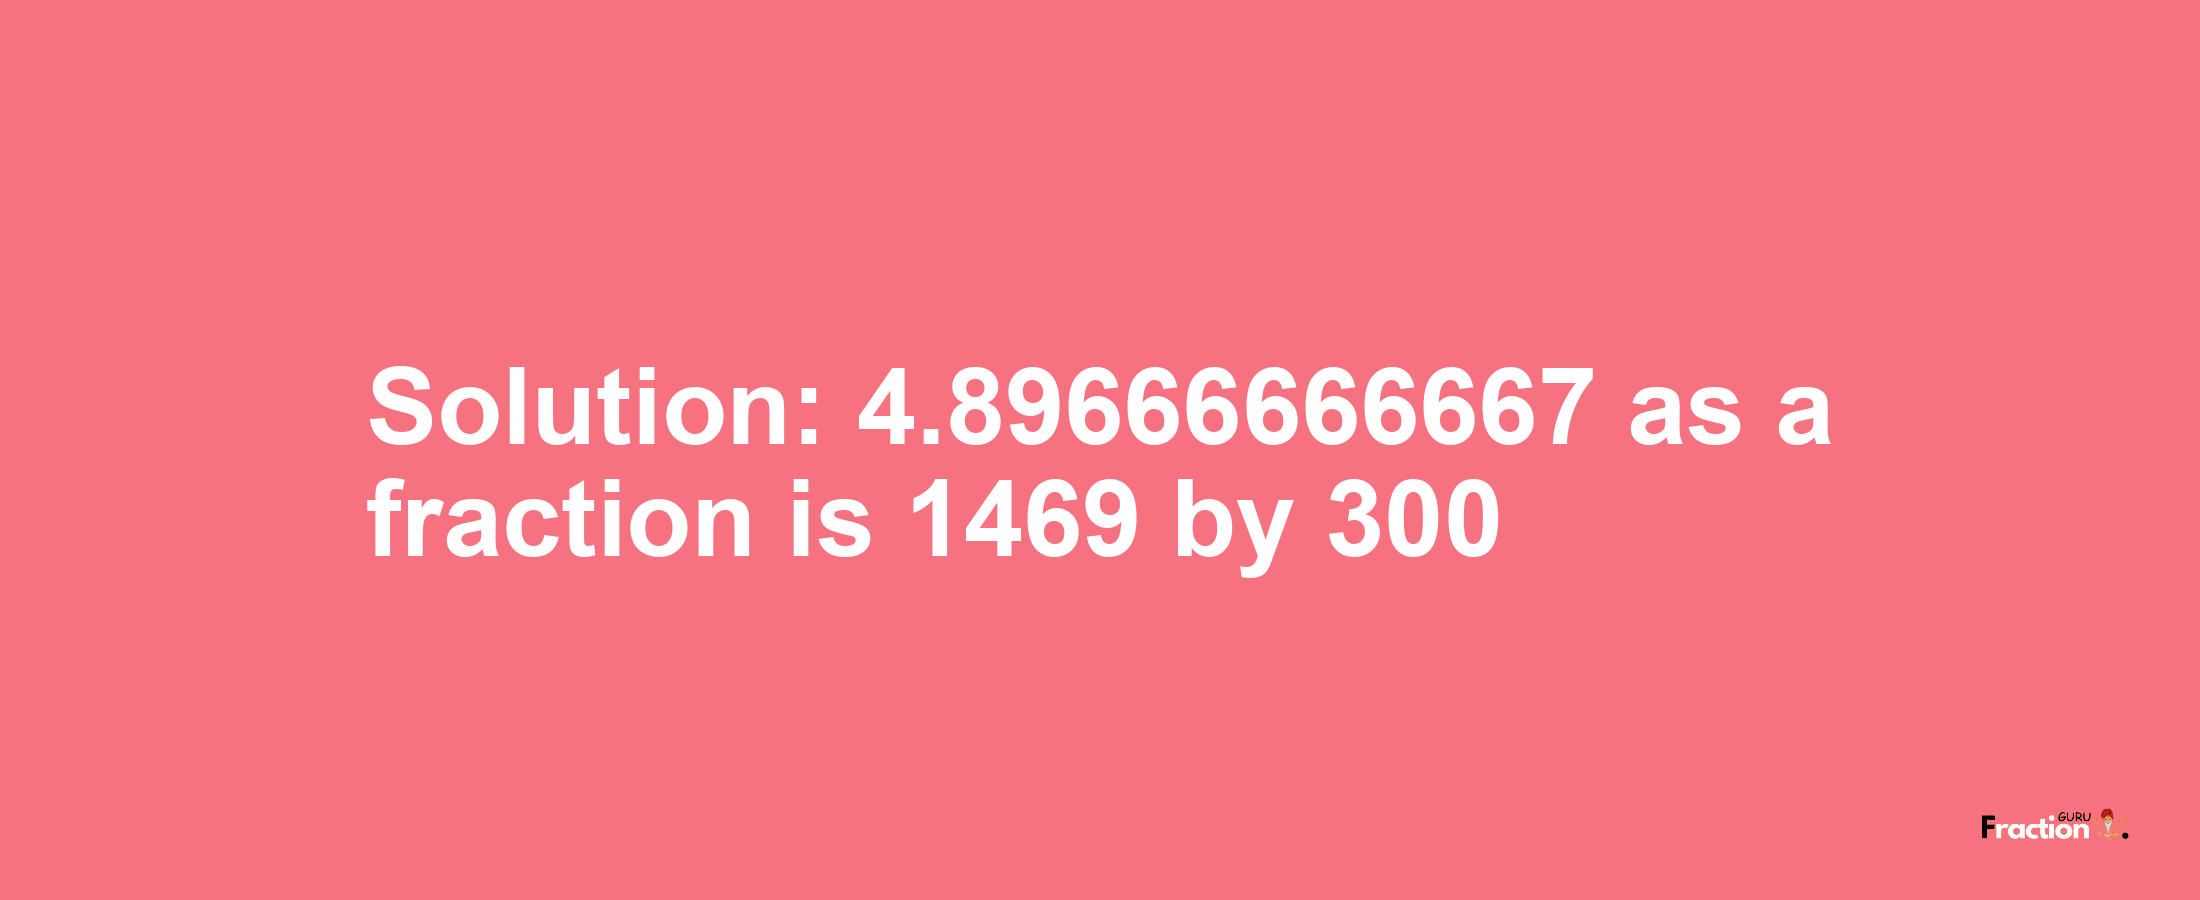 Solution:4.89666666667 as a fraction is 1469/300